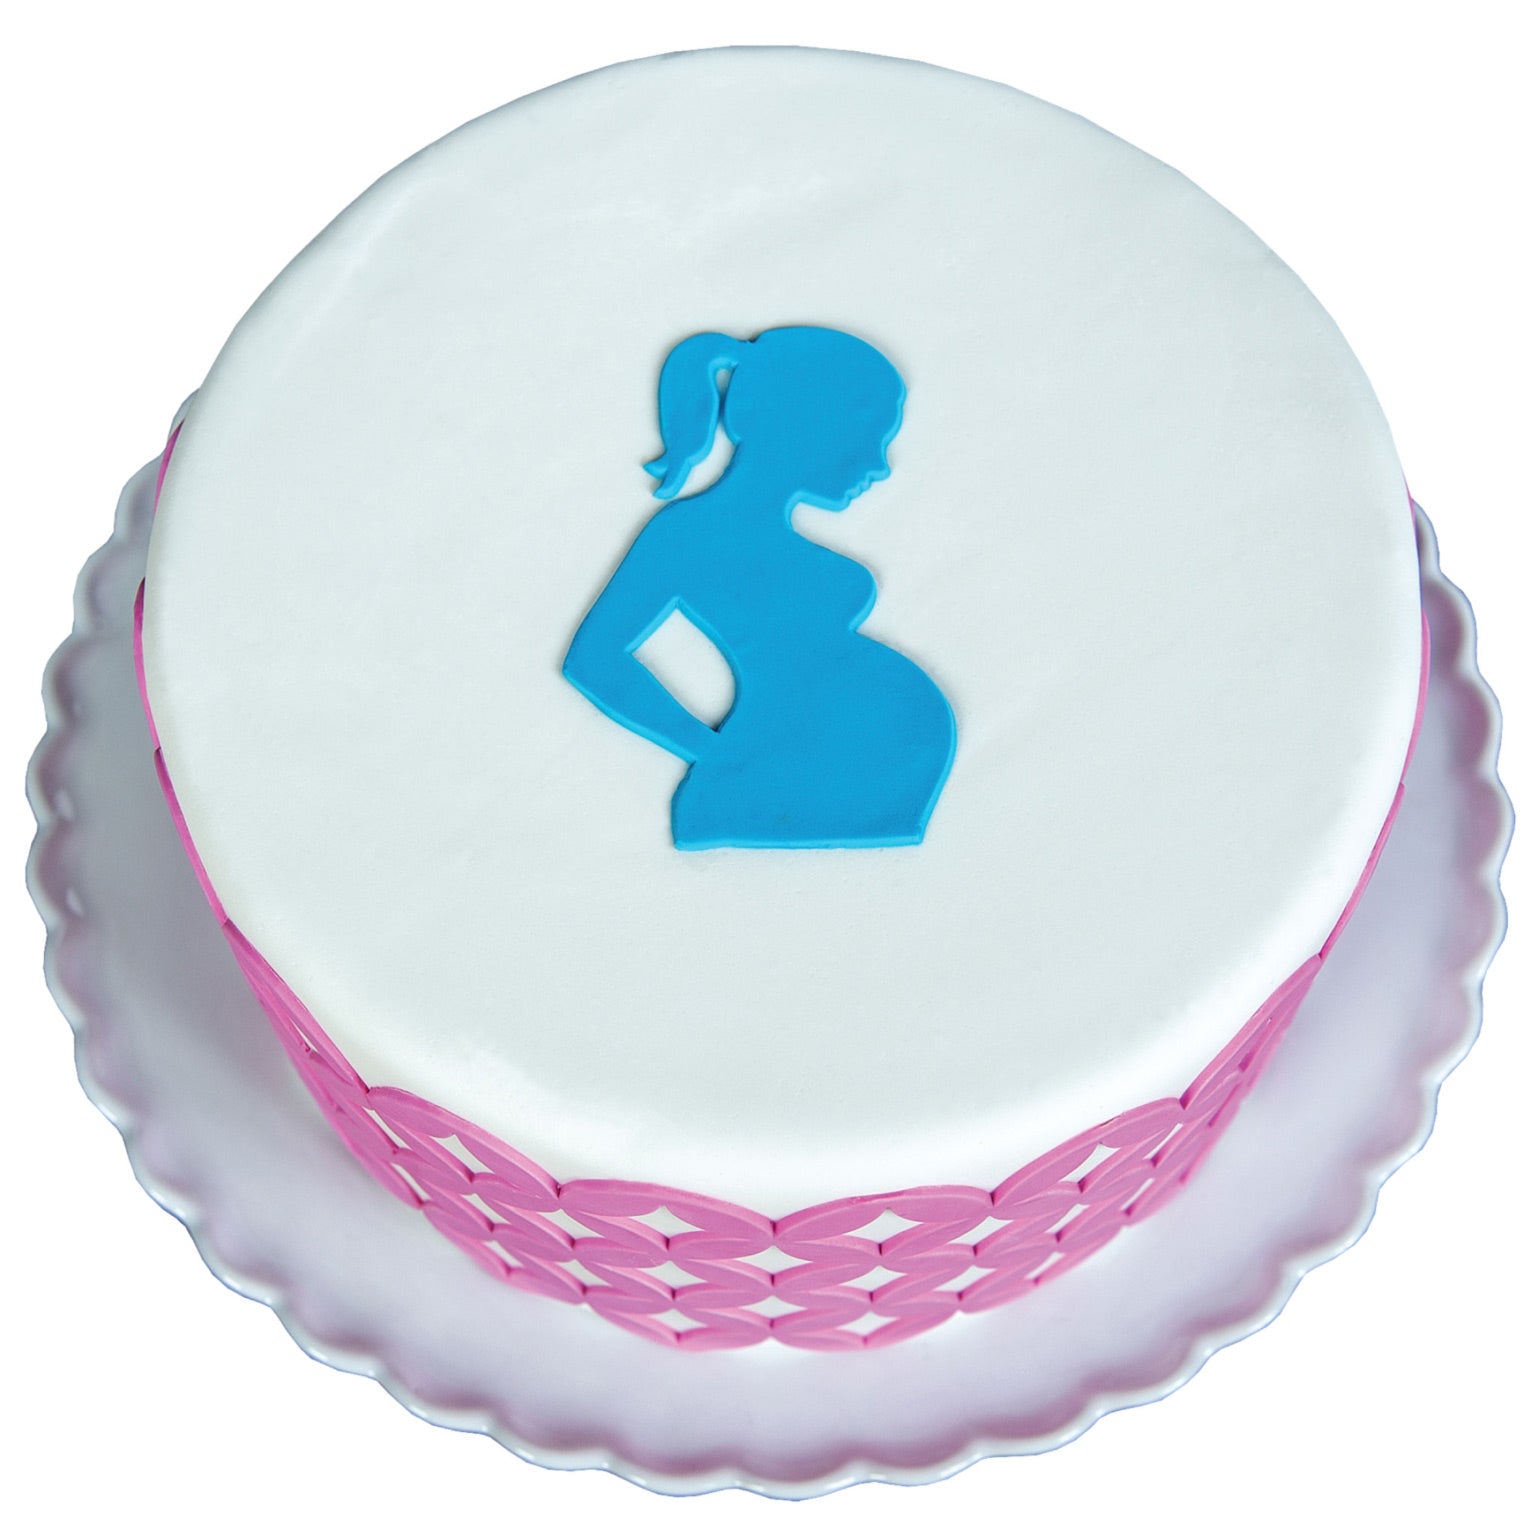 Baby shower cake. 3d illustration of a cake for a baby girl shower. |  CanStock